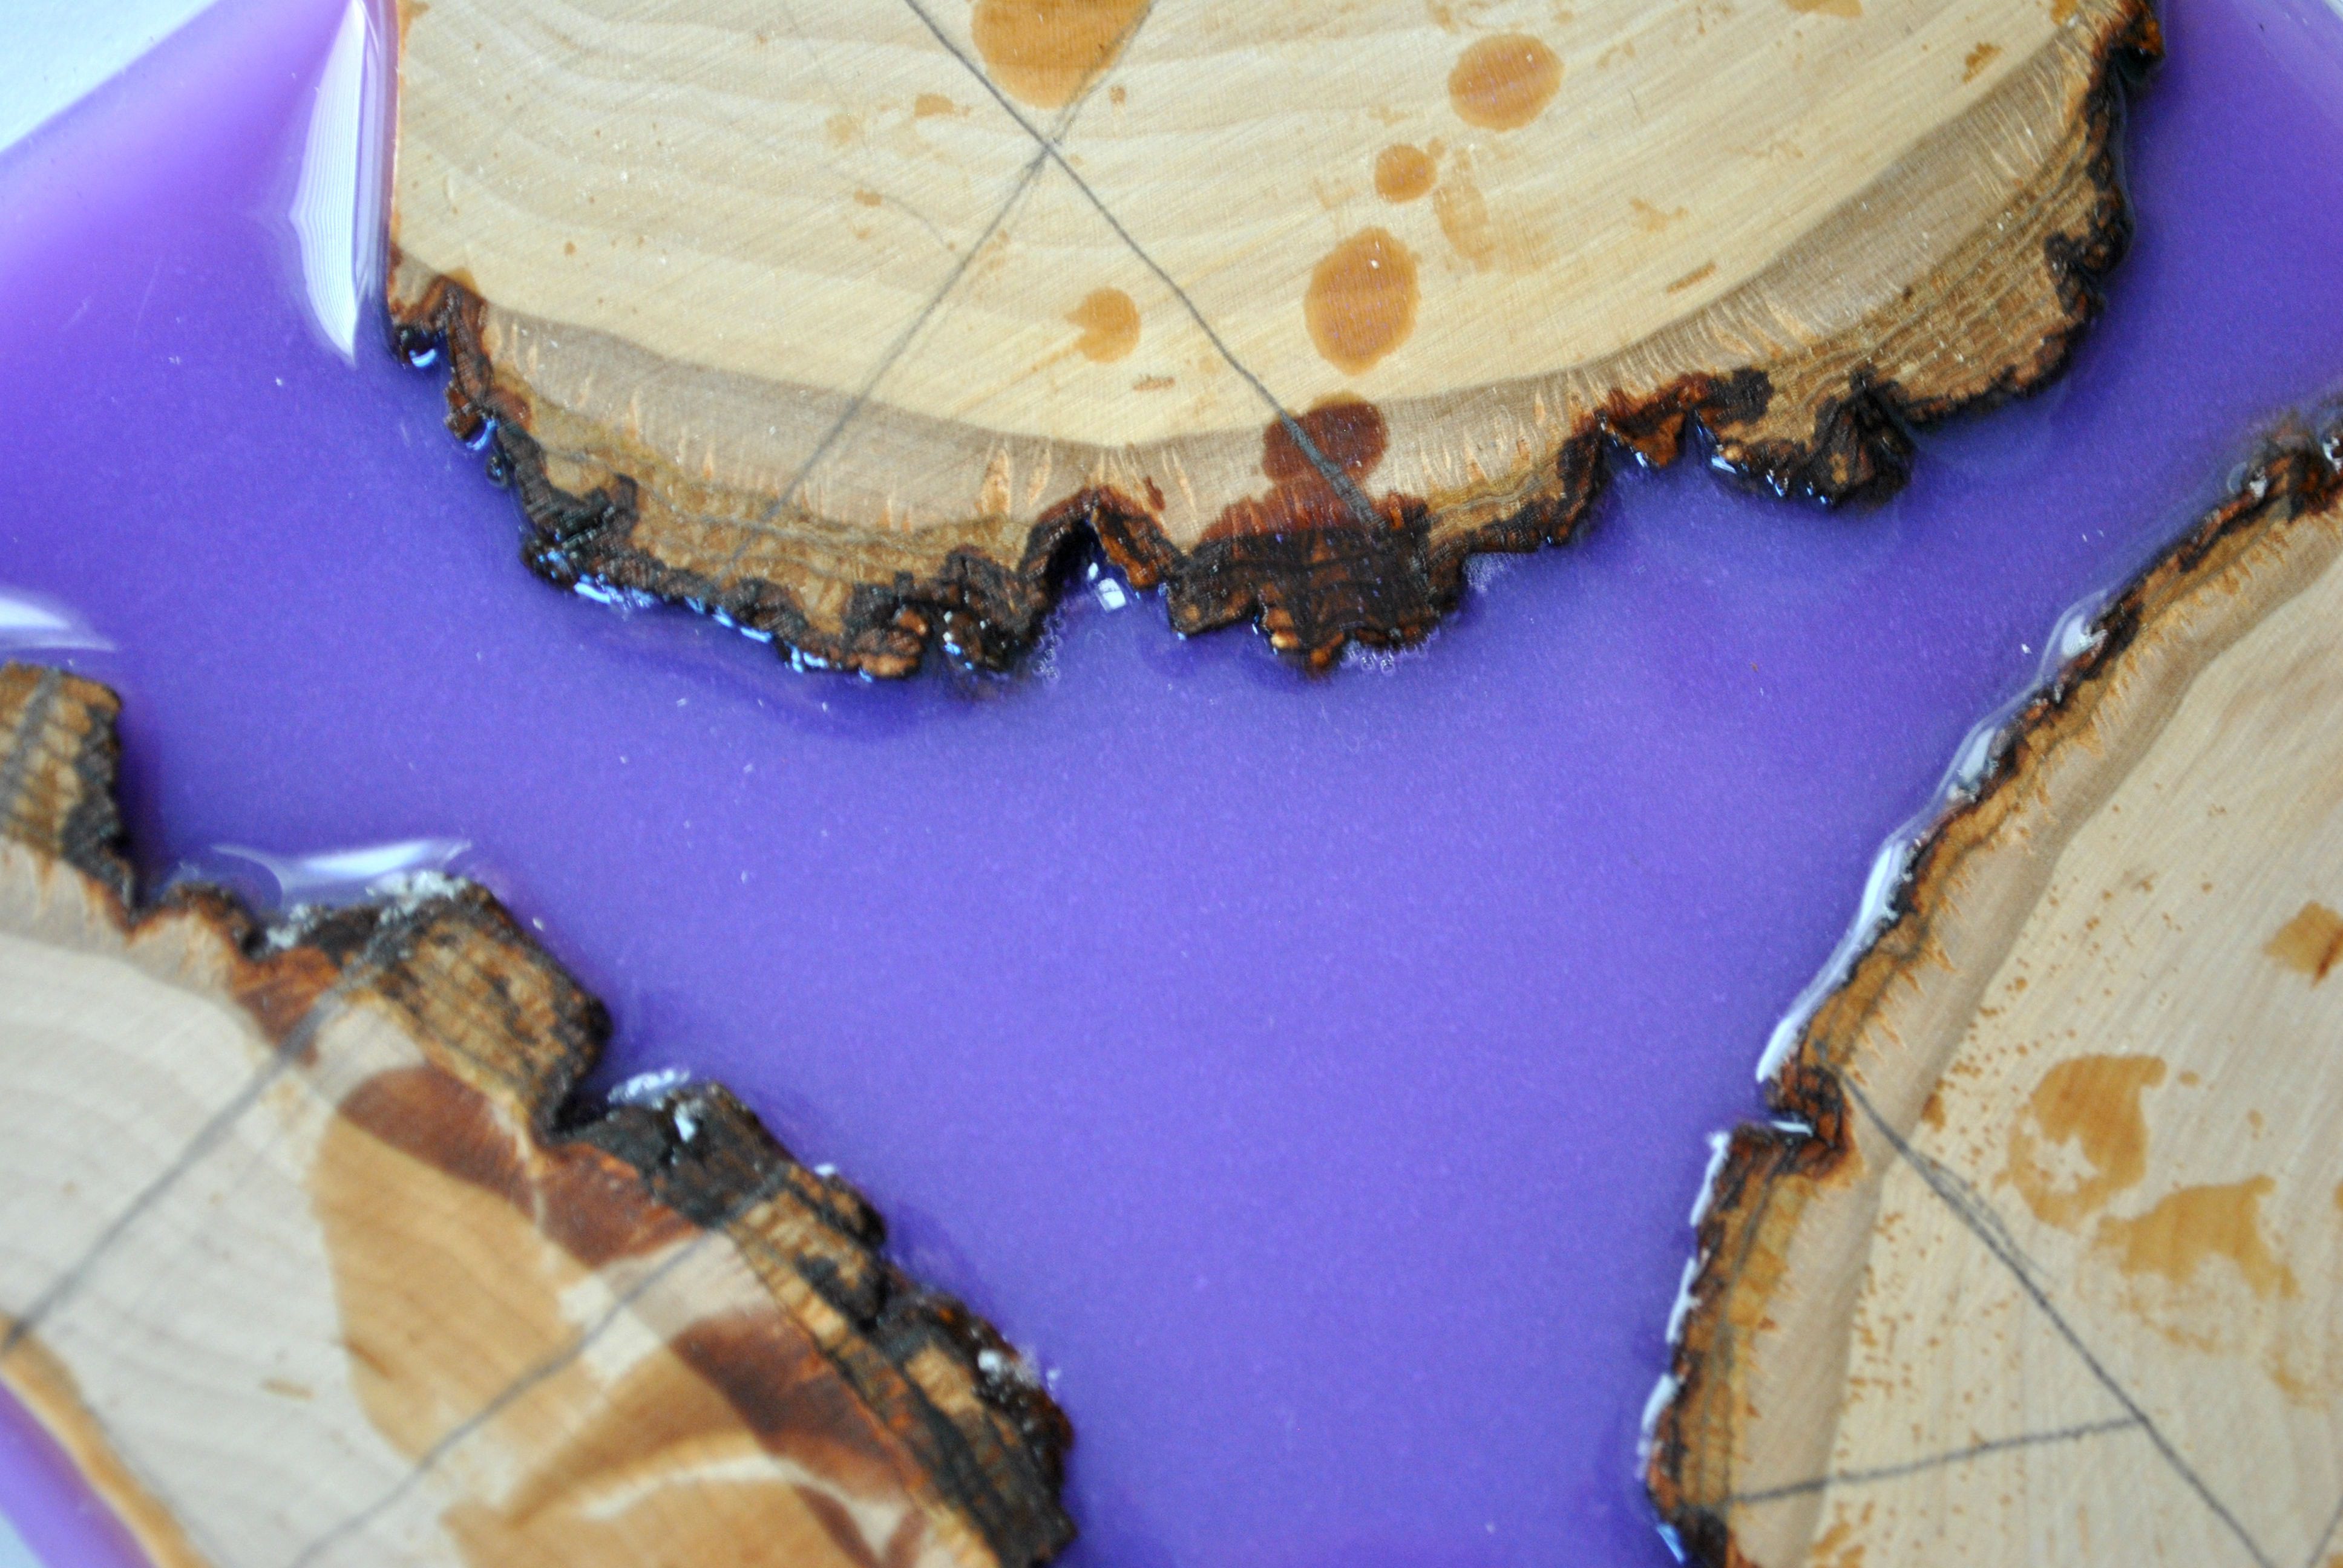 pieces of wood in lavender resin with cut measurements drawn in pencil